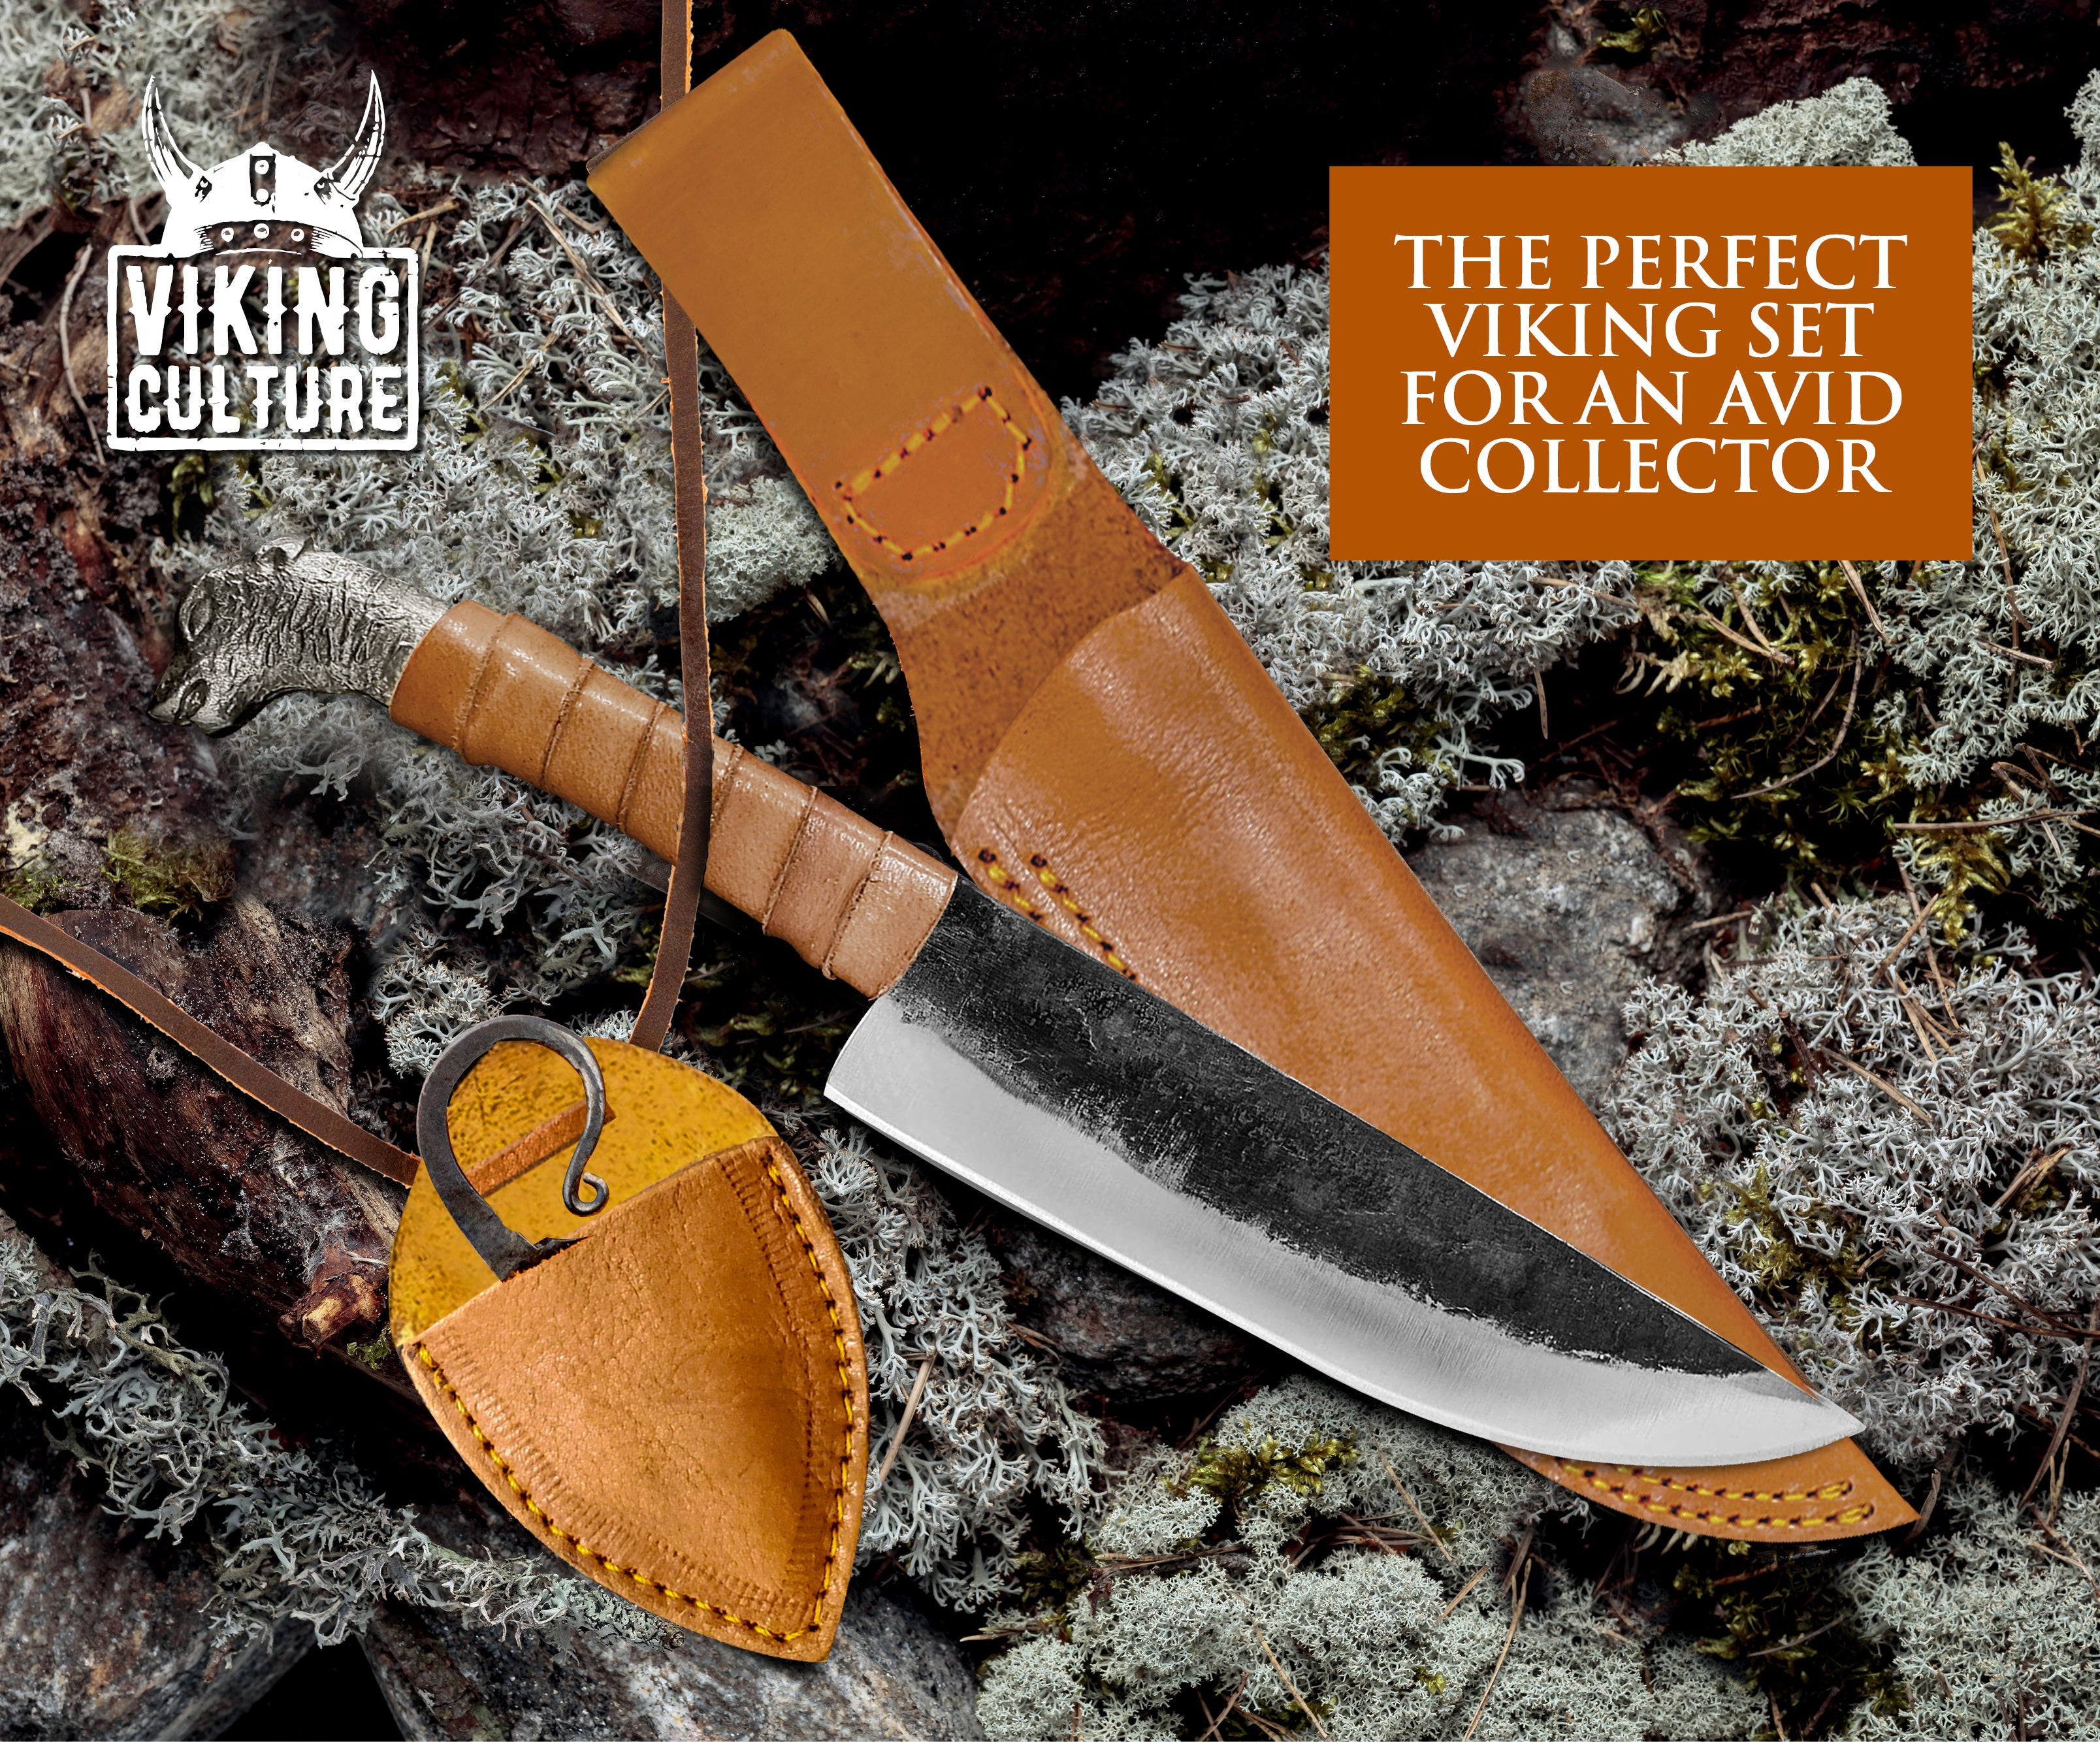 Viking Culture 2-Piece Viking knife Set - 10.3" Wolf-Head Viking Knife with 6.5" Blade & Leather Sheath - 3" Celtic Pocket Knife with Necklace Case - Sharp Hand-Forged Real Carbon Steel